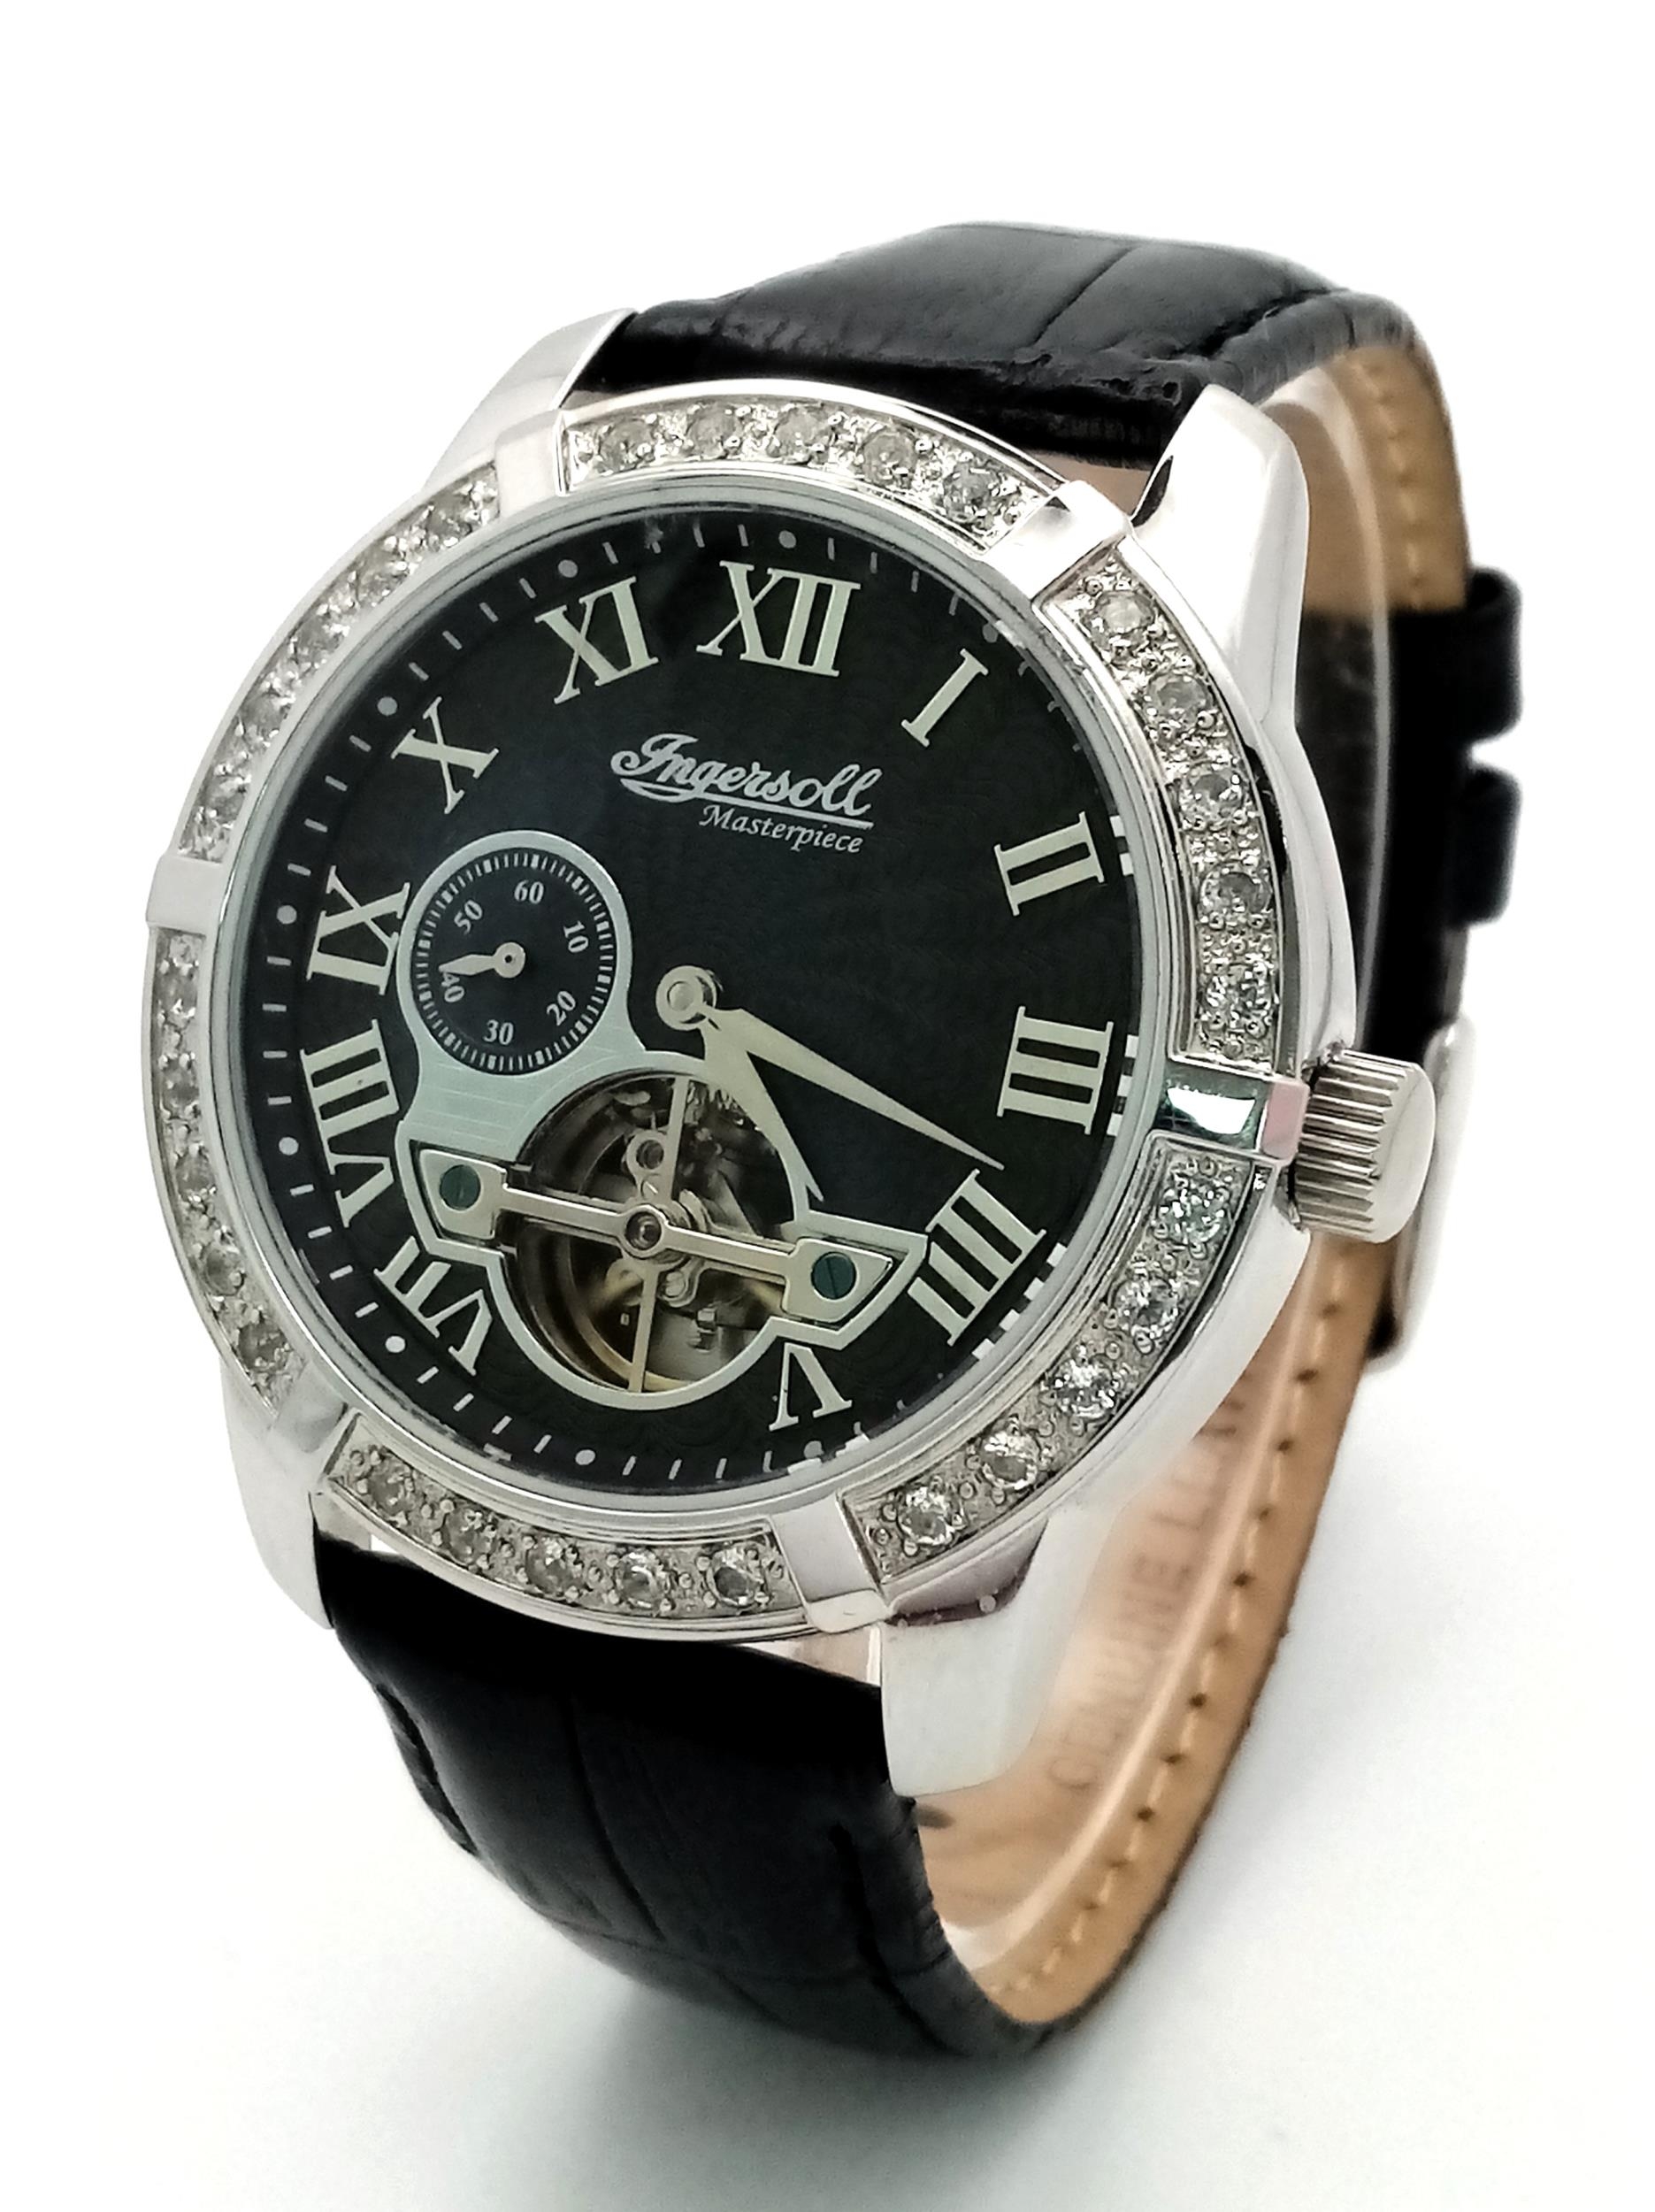 An Ingersoll Masterpiece Skeleton Gents Automatic Watch. Black leather strap. Stainless steel case -